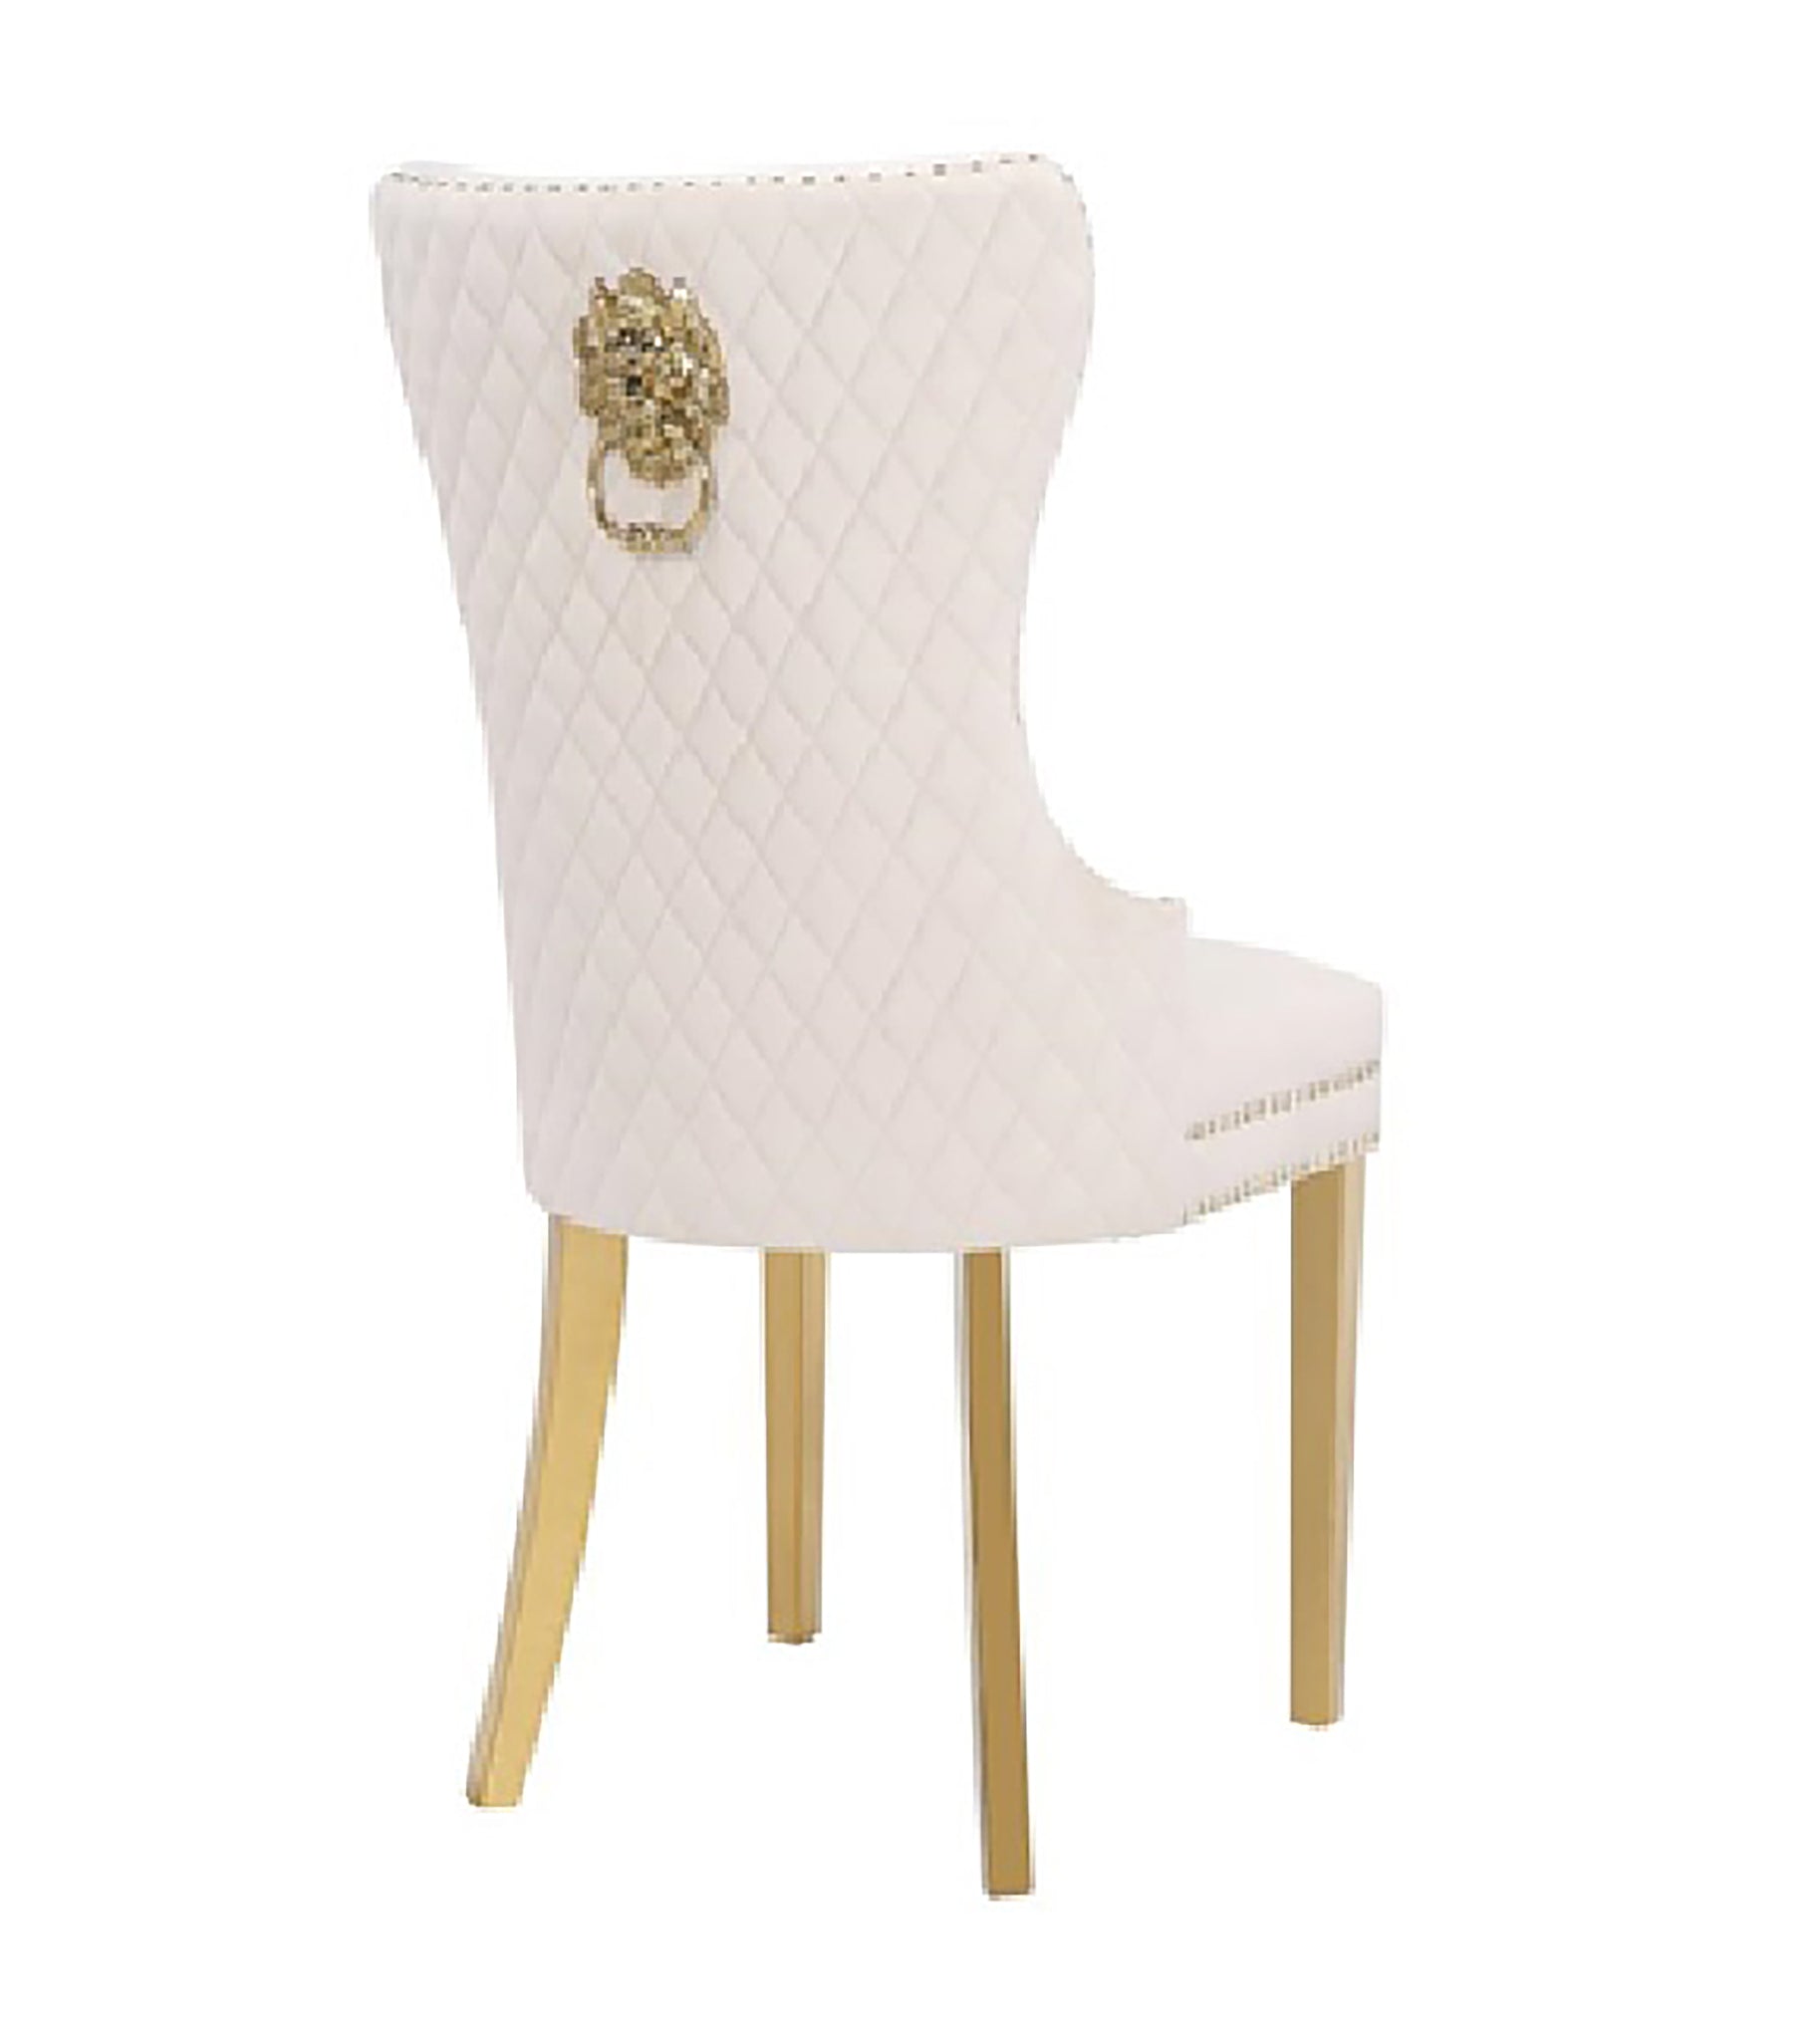 Simba Gold 2 Piece Dinning Chair Finish with Velvet beige-dining room-traditional-accent